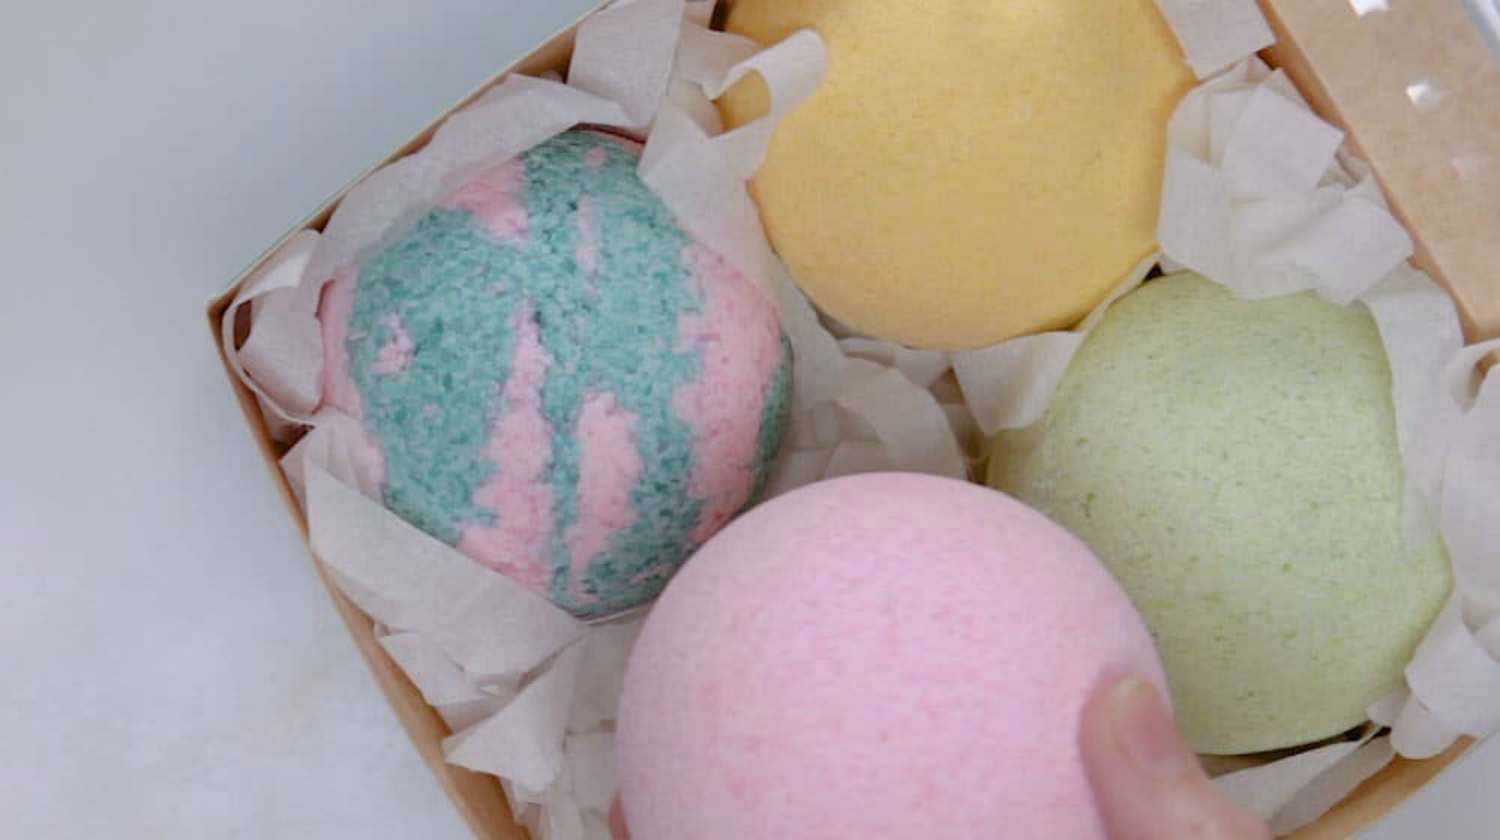 Feature | Colorful DIY Bath bombs in a box | DIY Bath Bombs For A More Bubbly and Lively Bath Experience